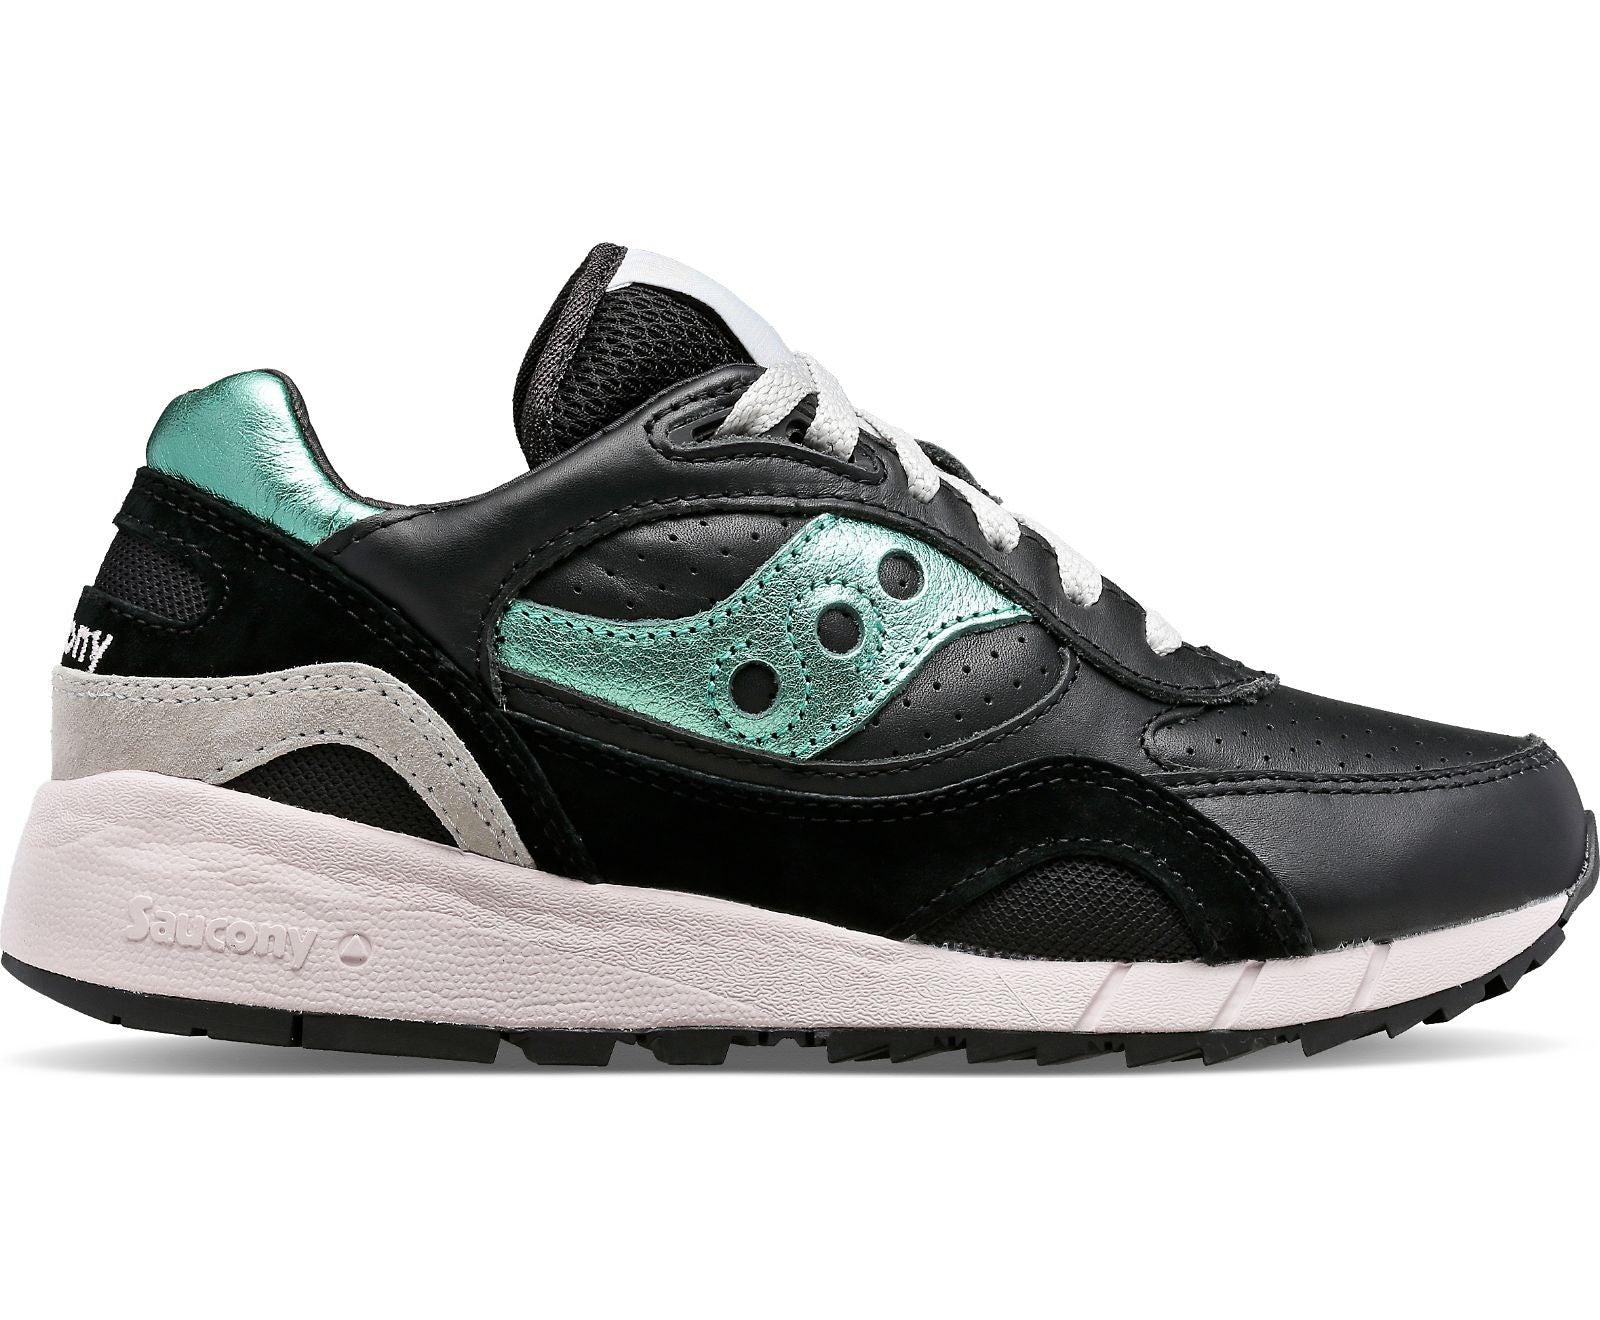 Lateral view of the Saucony Shadow 6000 leather lifestyle shoe in the color Black/Aquamarine